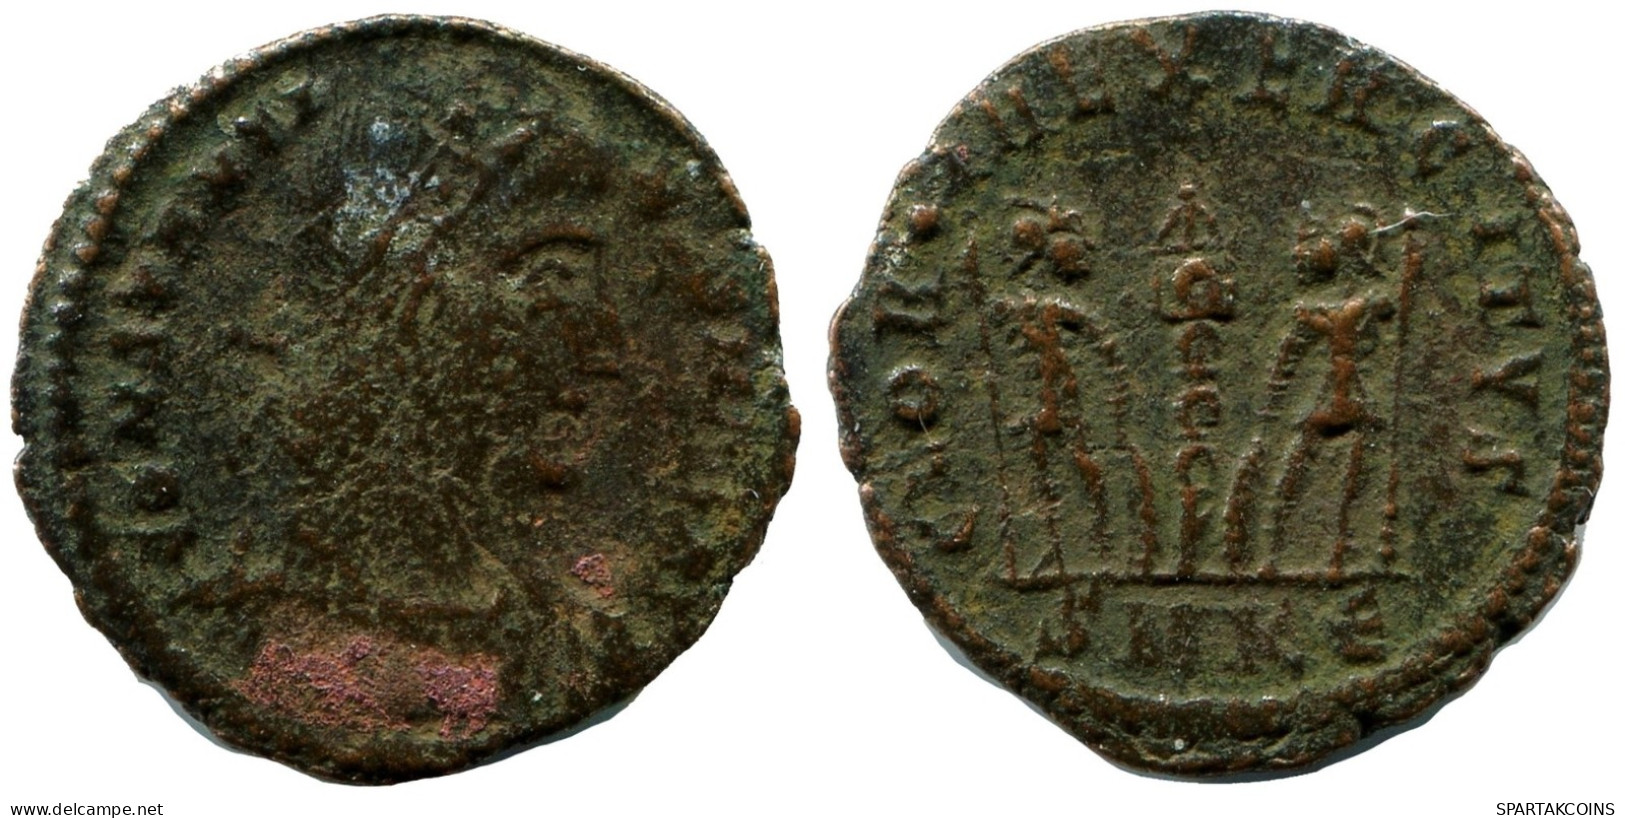 CONSTANTINE I MINTED IN CYZICUS FOUND IN IHNASYAH HOARD EGYPT #ANC10991.14.U.A - The Christian Empire (307 AD Tot 363 AD)